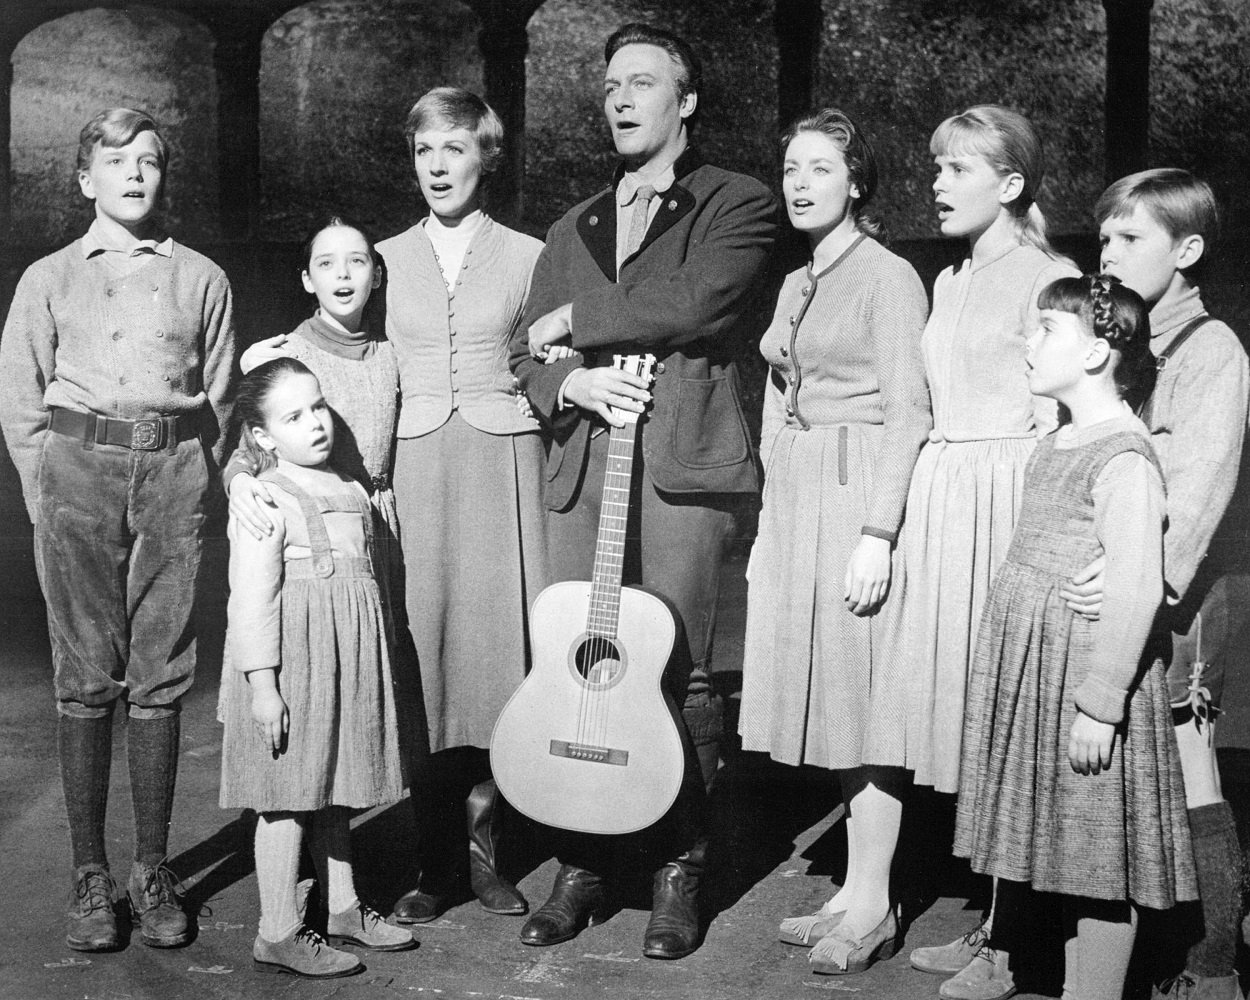 The Sound of Music cast depicts the real family